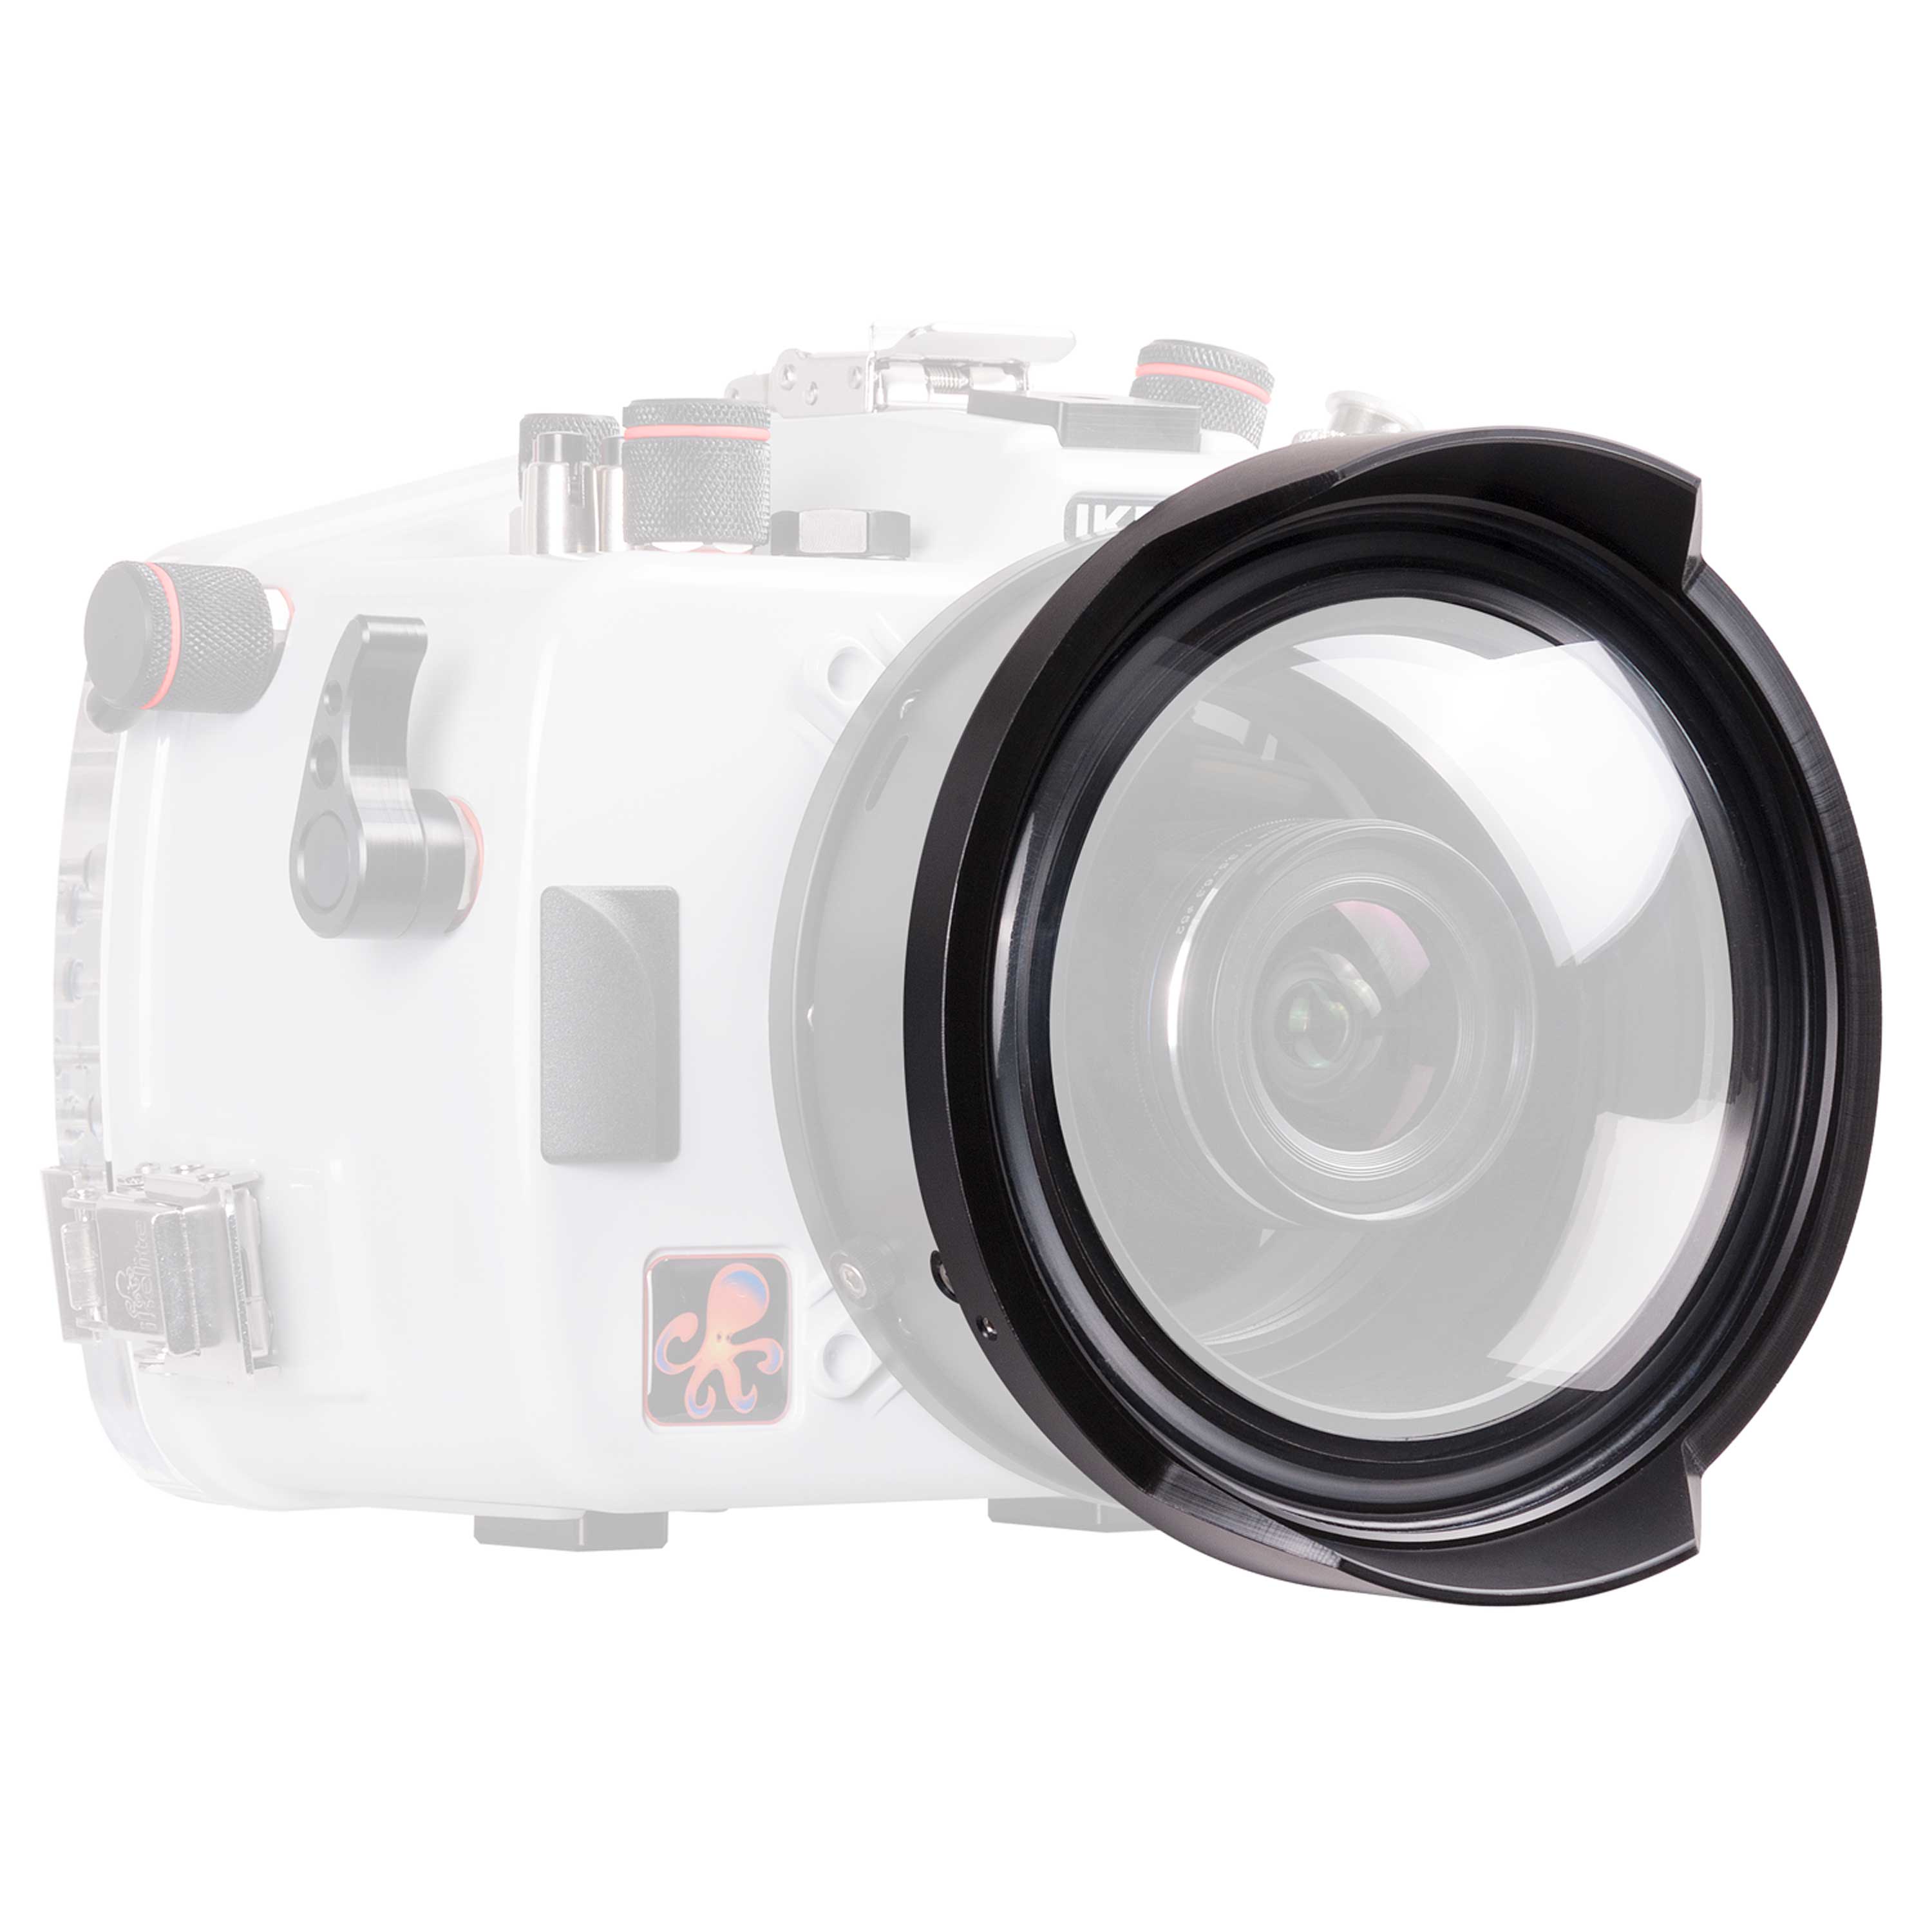 Ikelite DL Compact 8" Inch Dome Port 